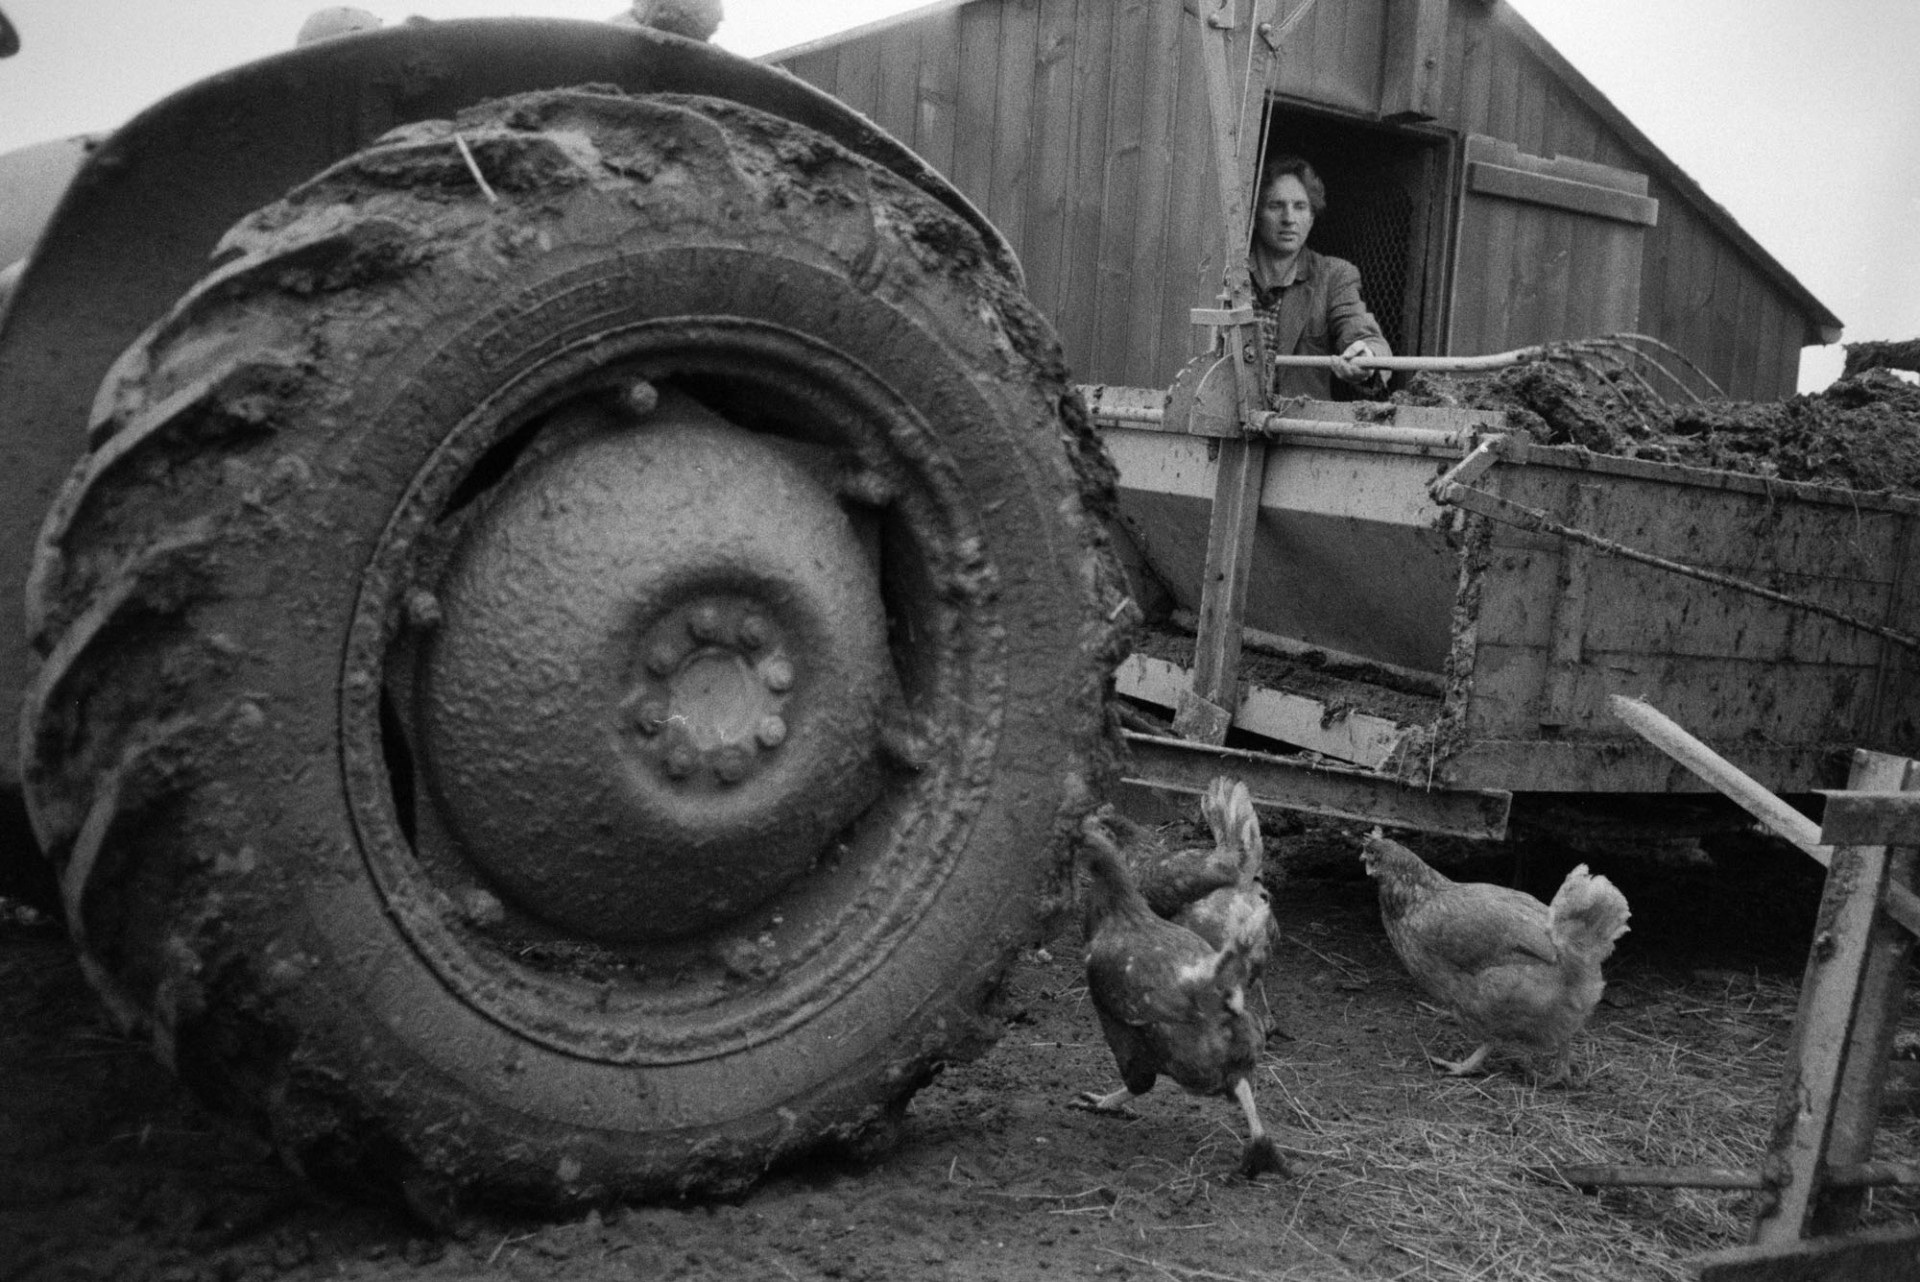 Ivor Bourne cleaning out chicken houses and putting the muck into a muck spreader, at Mill Road Farm, Beaford. Chickens are roaming around the wheel of the tractor attached to the muck spreader. The farm was also known as Jeffrys.